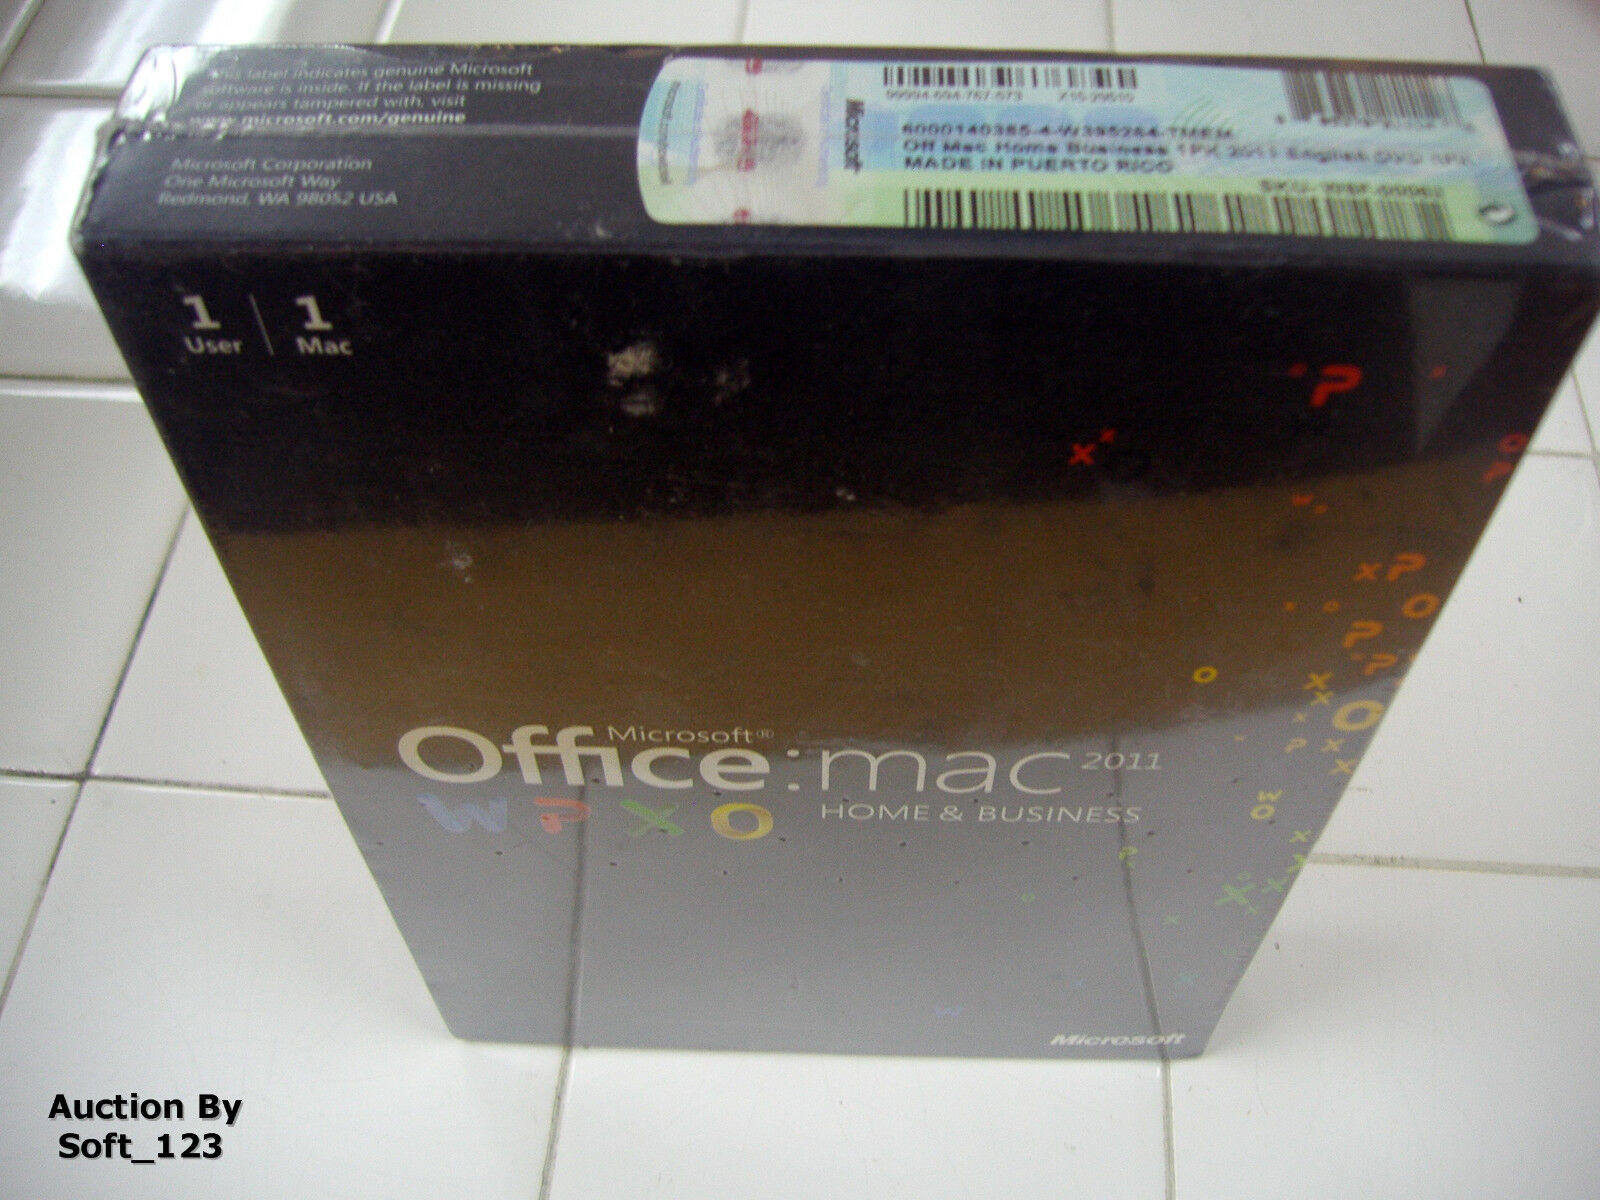 MS Microsoft Office MAC 2011 Home and Business Full Retail English DVD =SEALED=